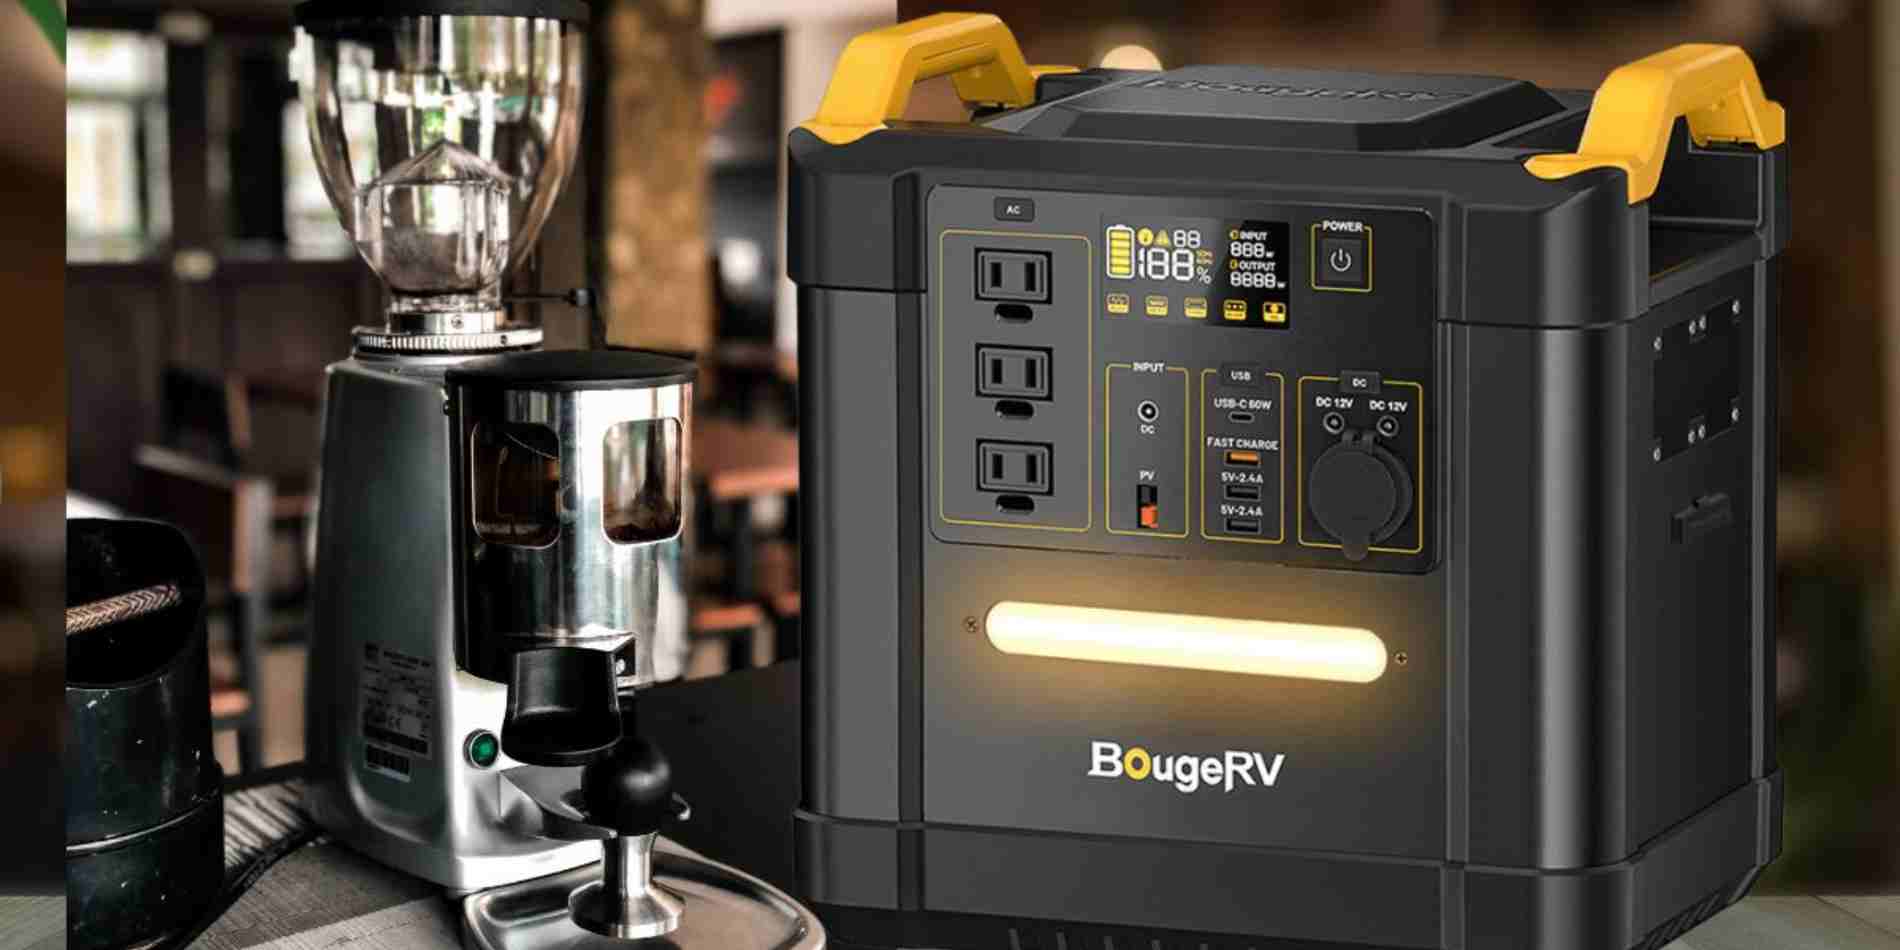 BougeRV’s portable power station for a coffee maker